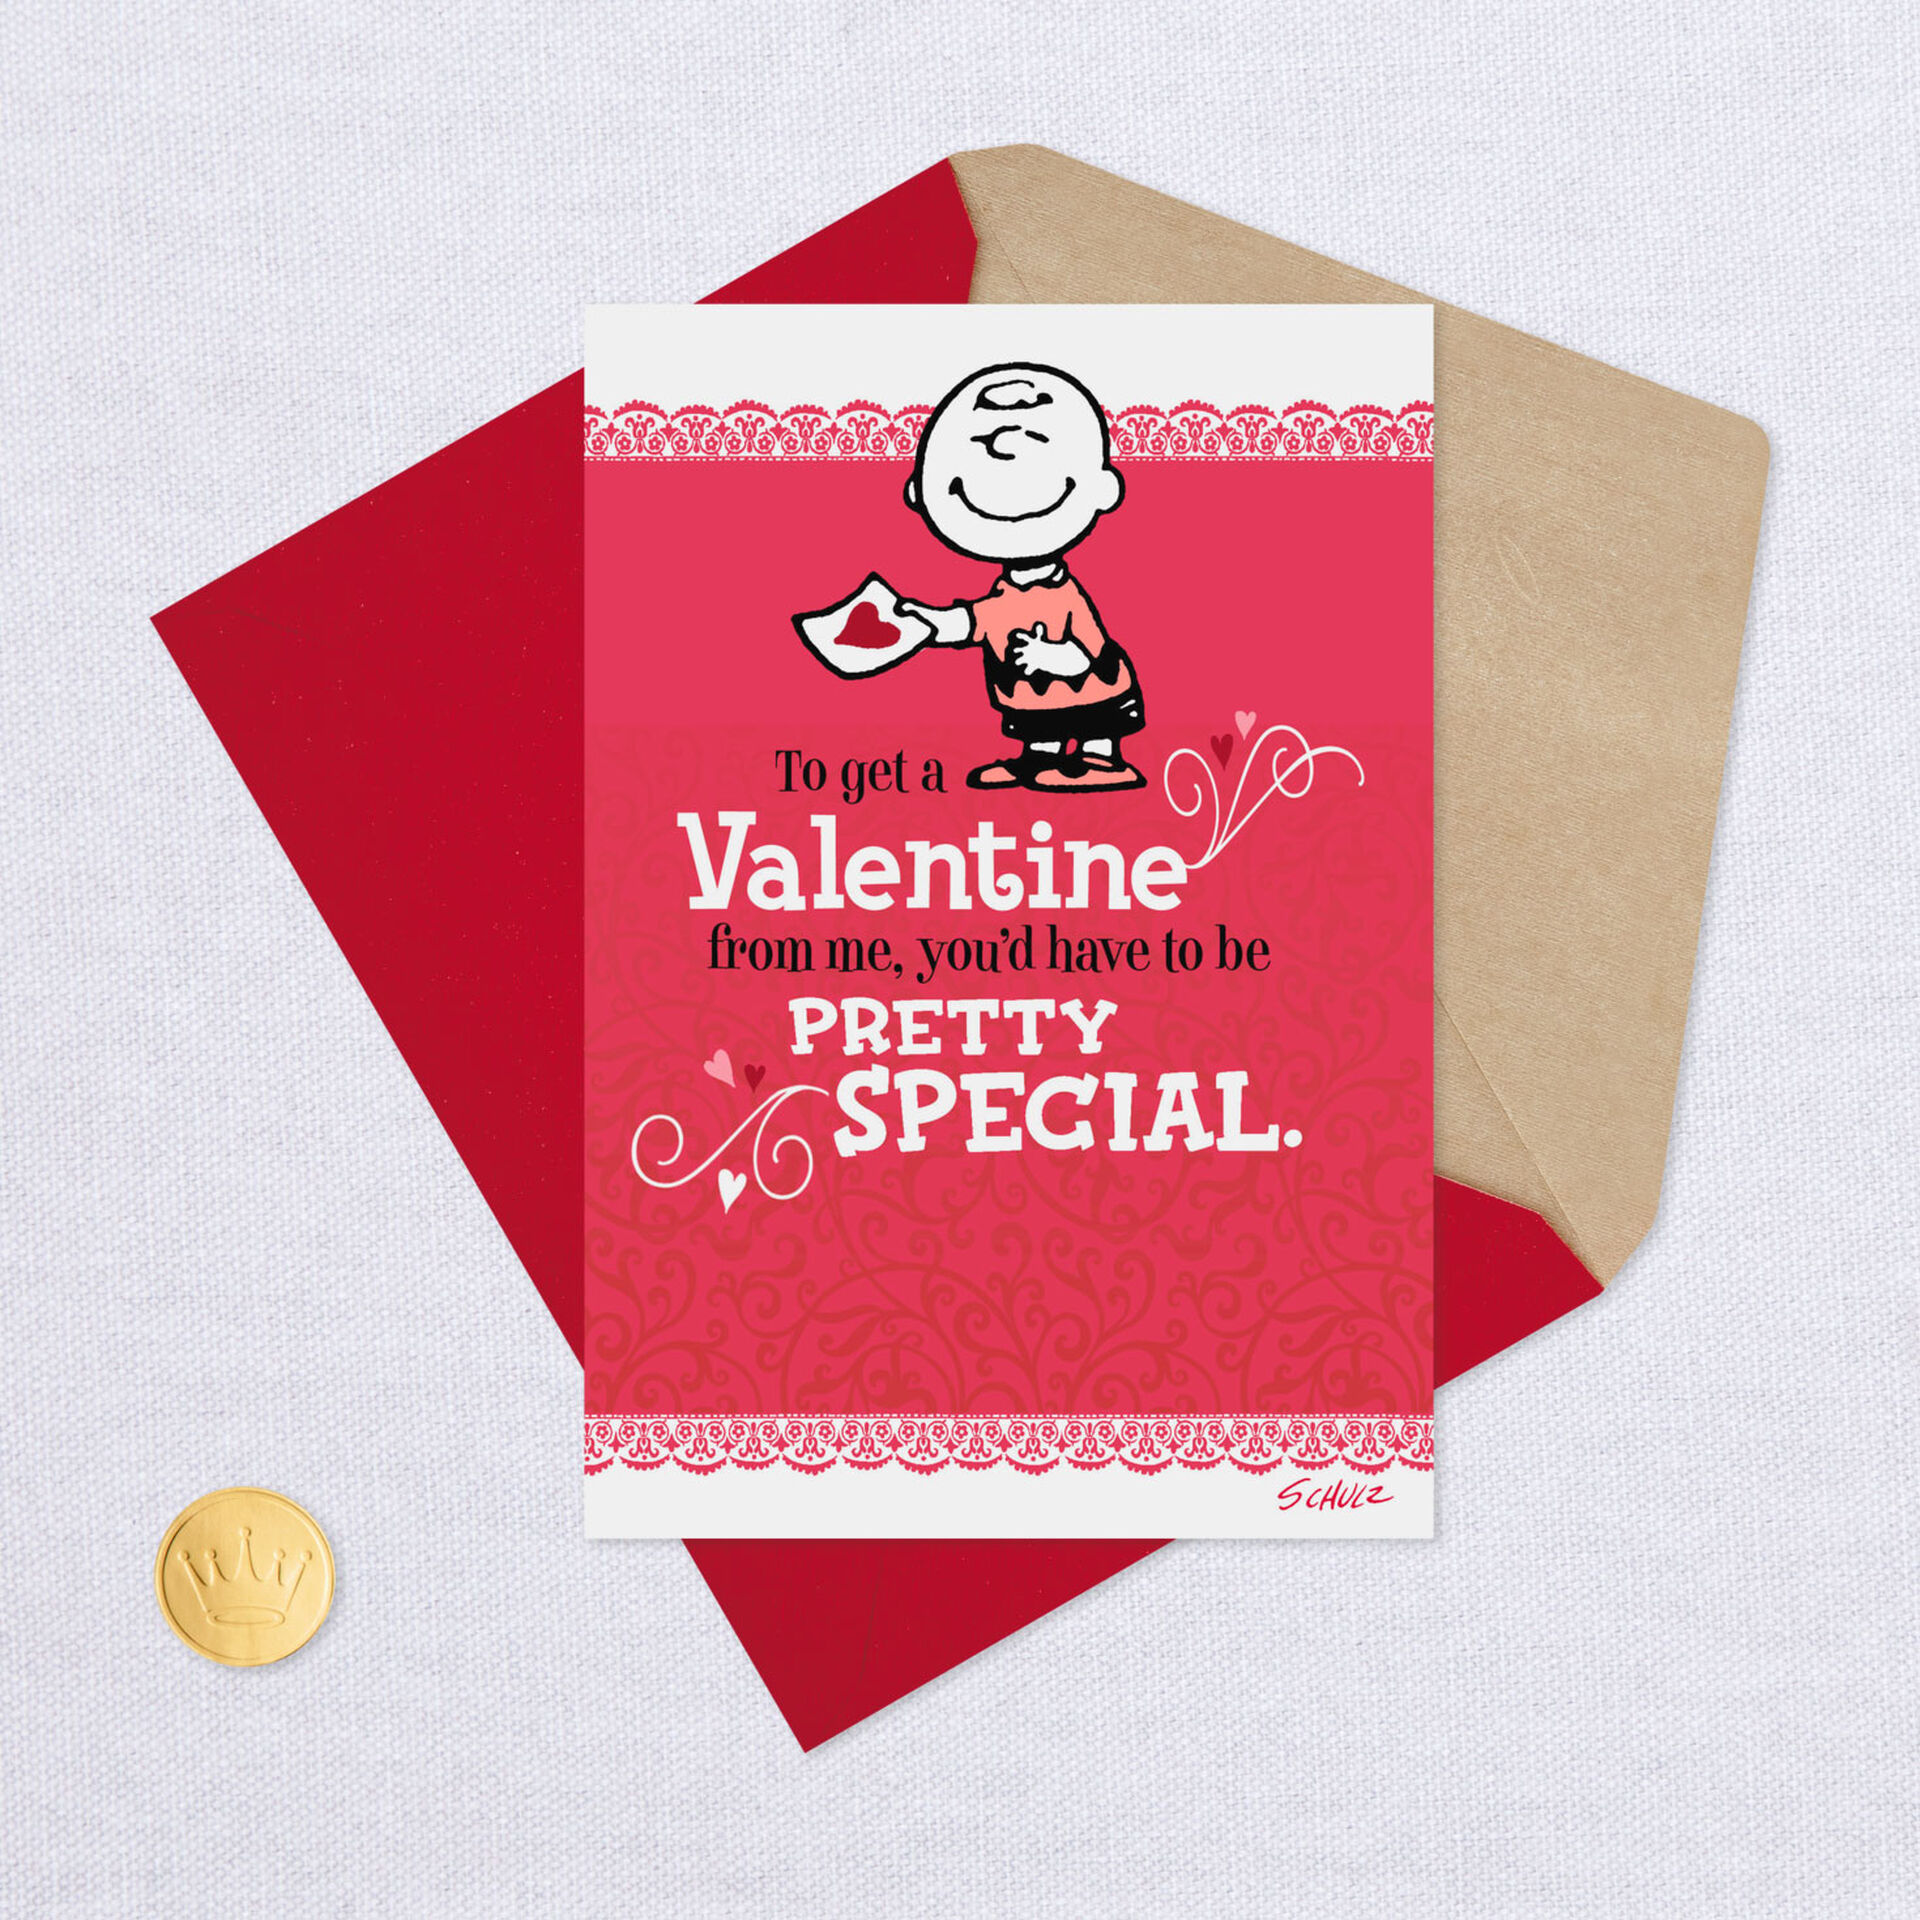 peanuts-charlie-brown-you-re-pretty-special-valentine-s-day-card